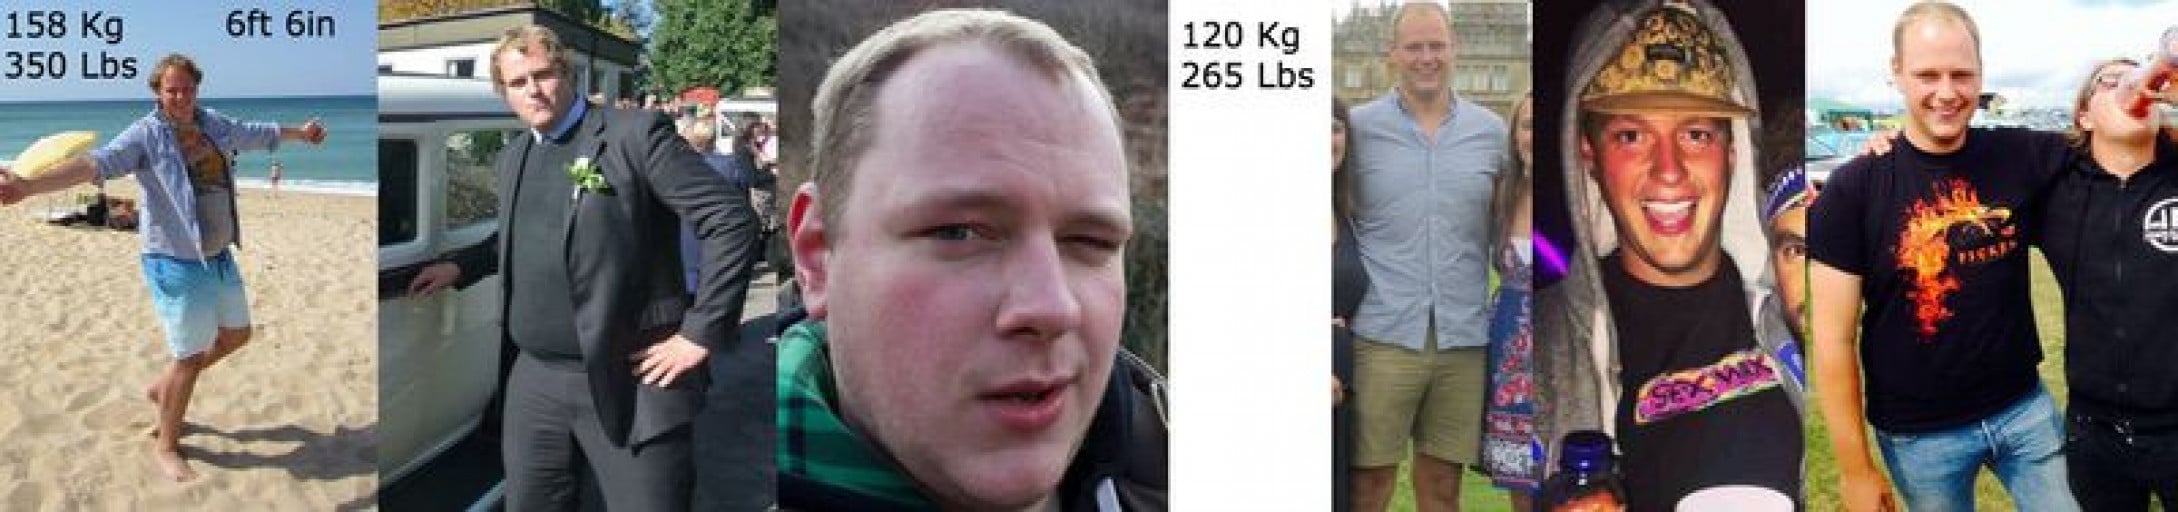 A photo of a 6'6" man showing a weight cut from 350 pounds to 265 pounds. A net loss of 85 pounds.